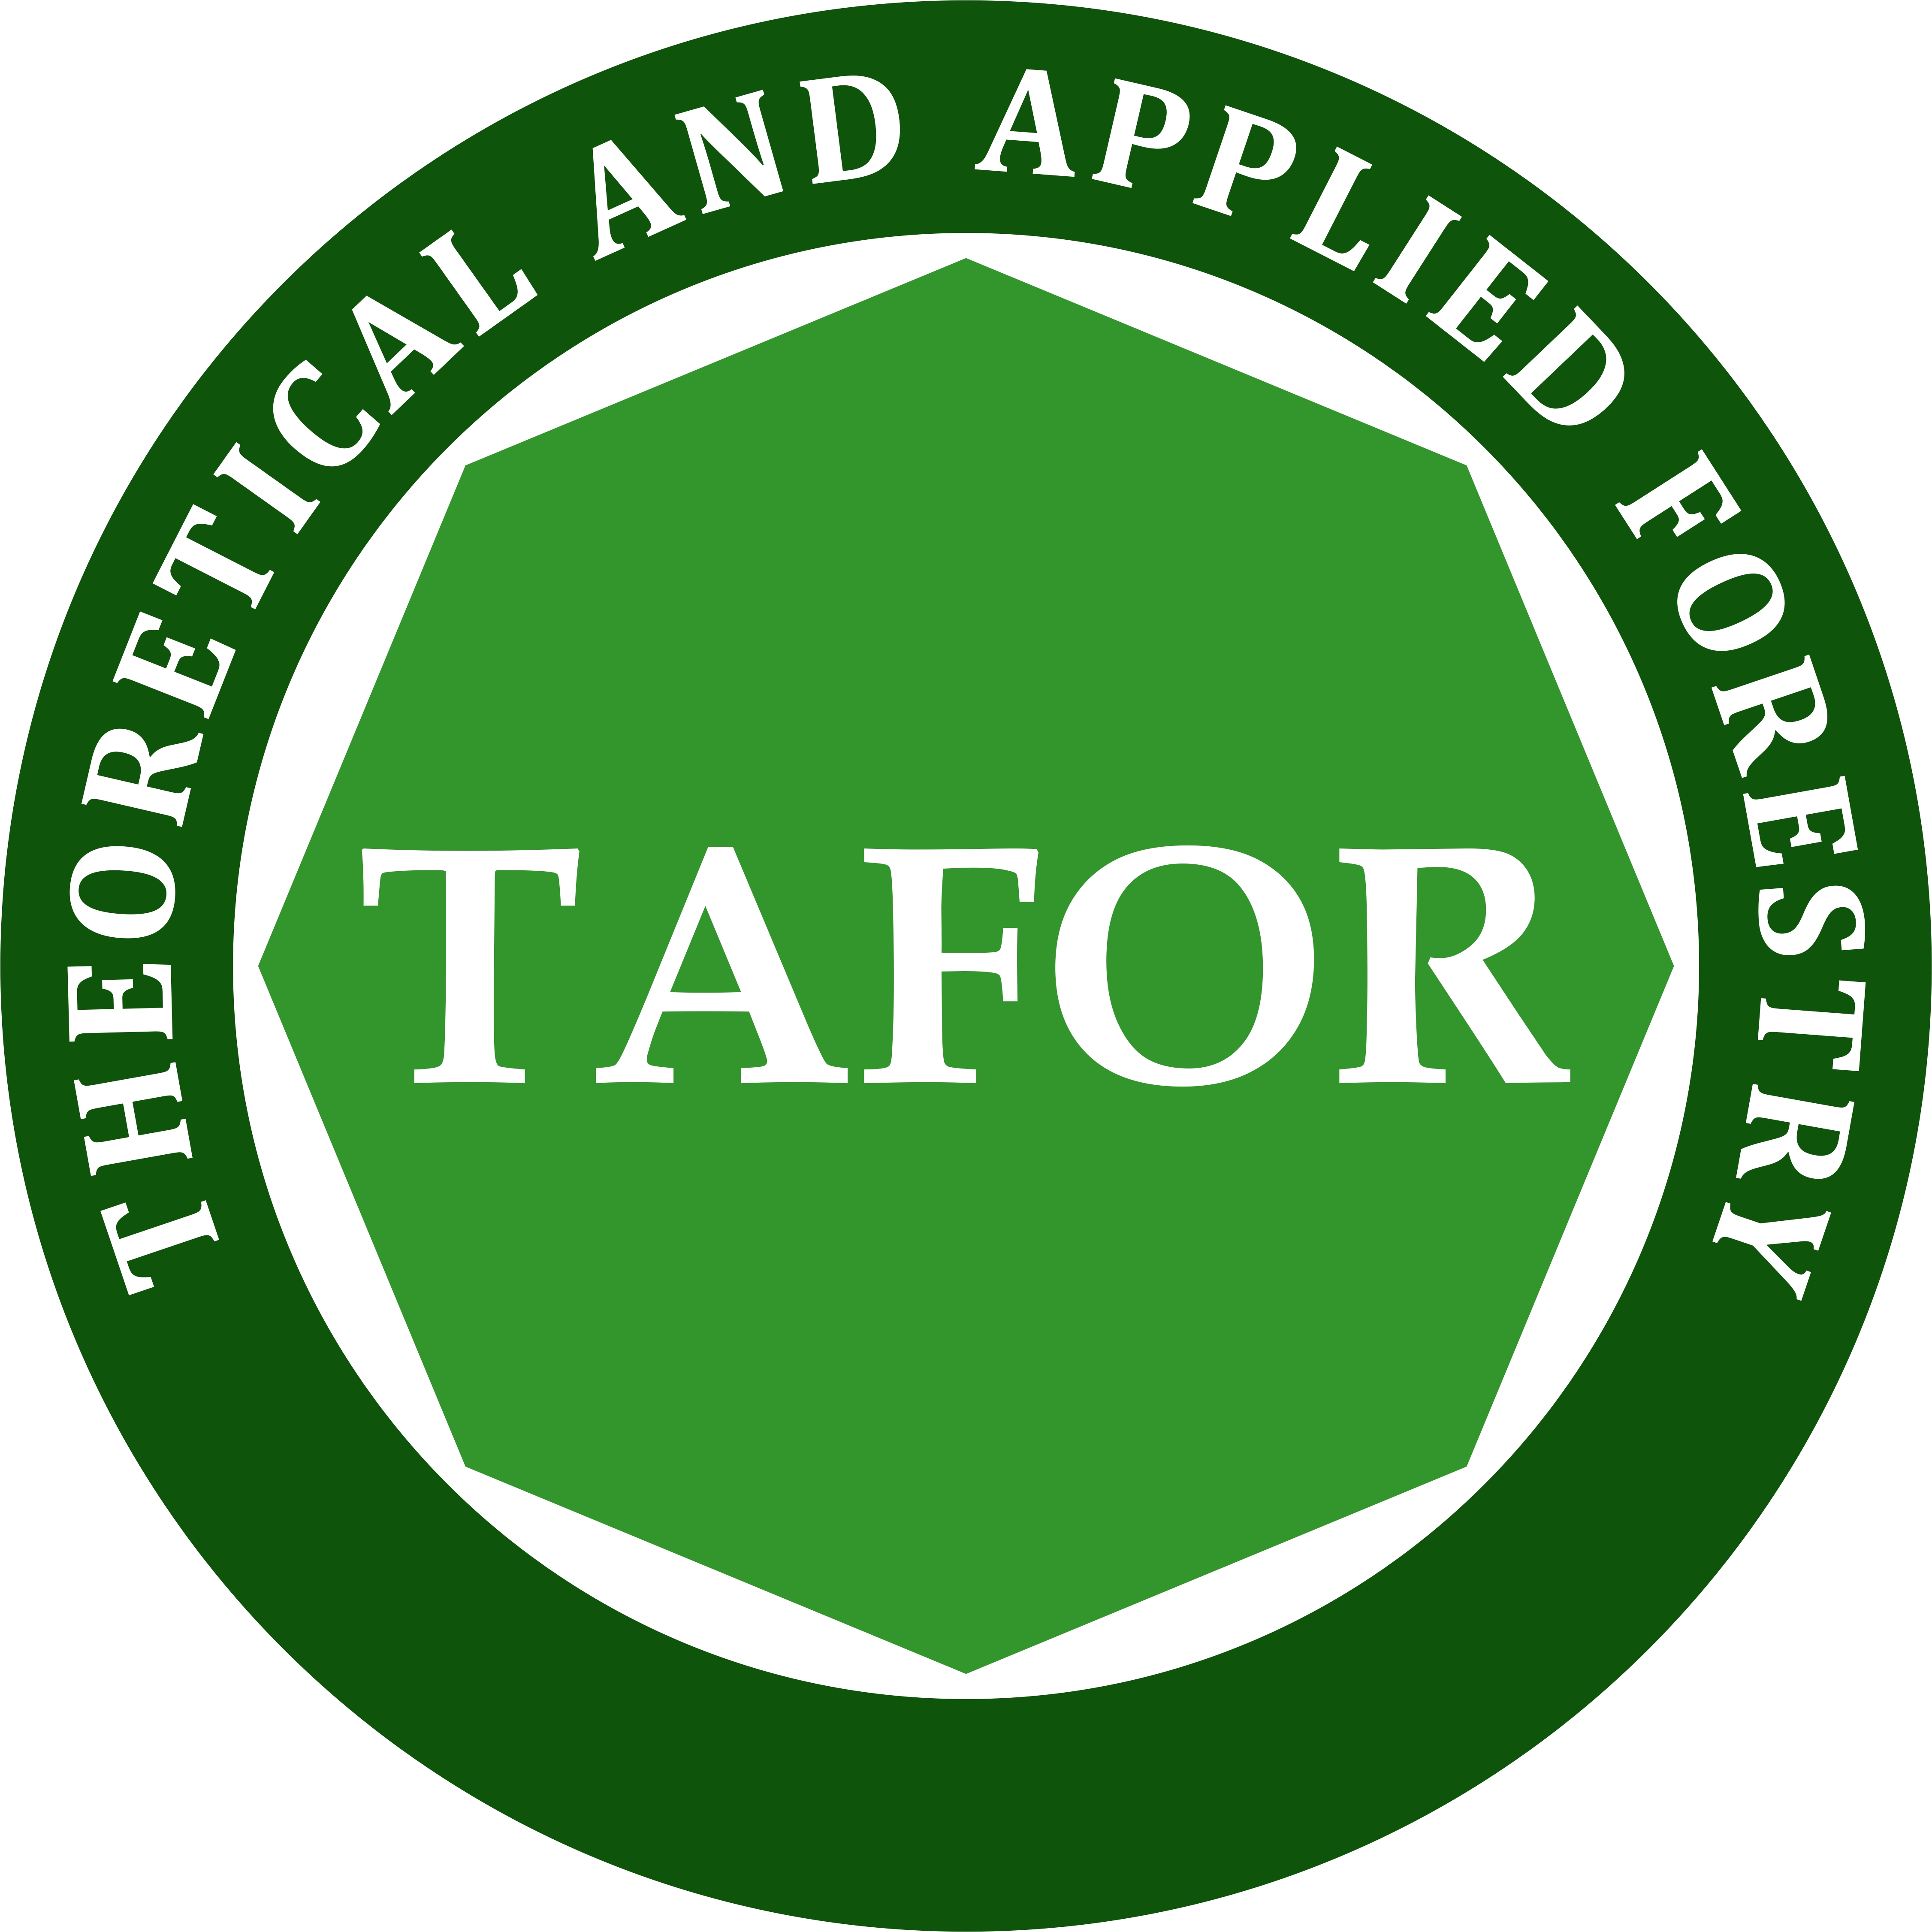 Theoretical and Applied Forestry